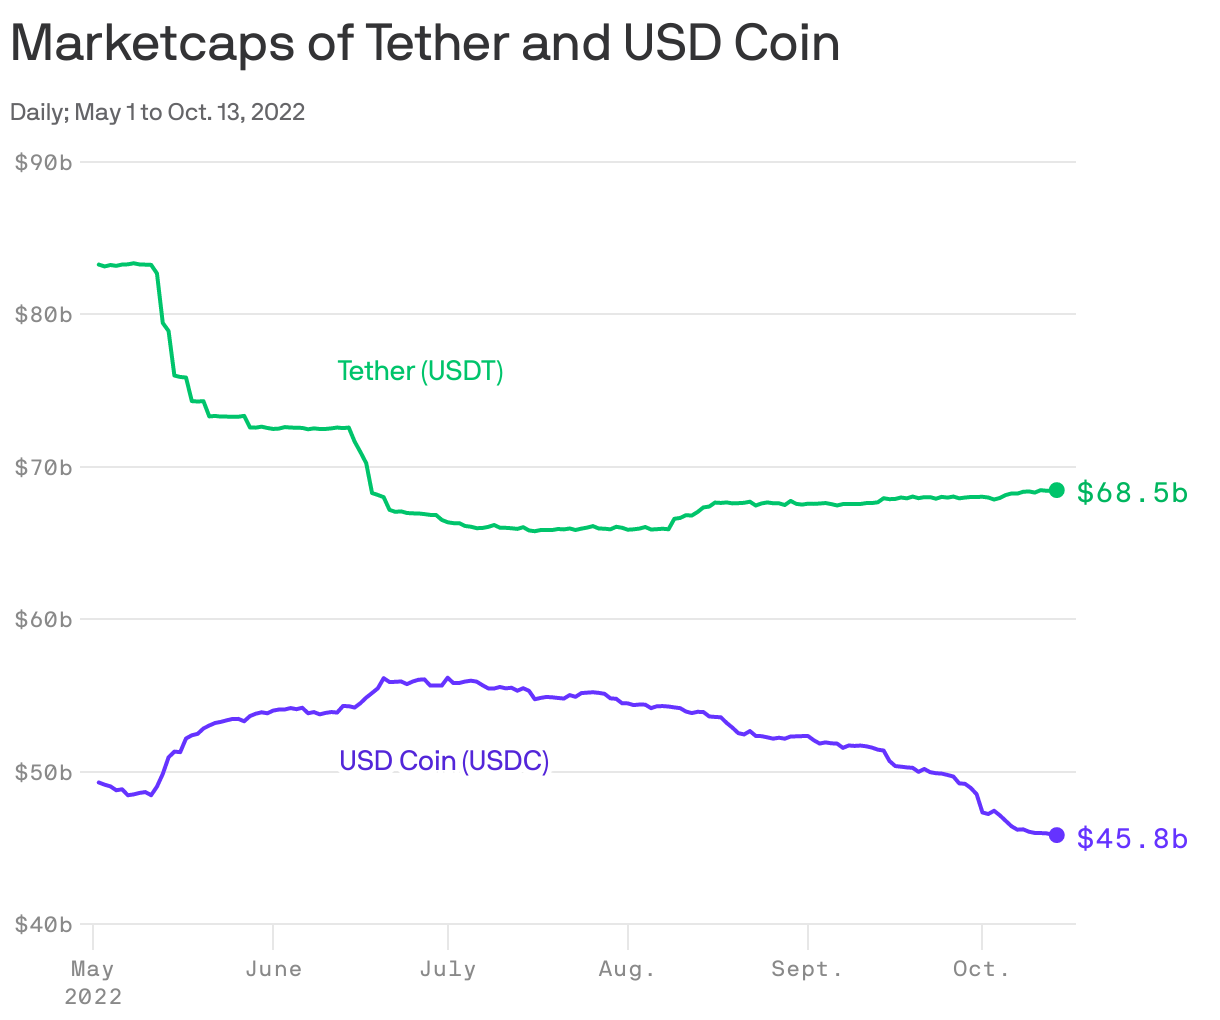 Marketcaps of Tether and USD Coin